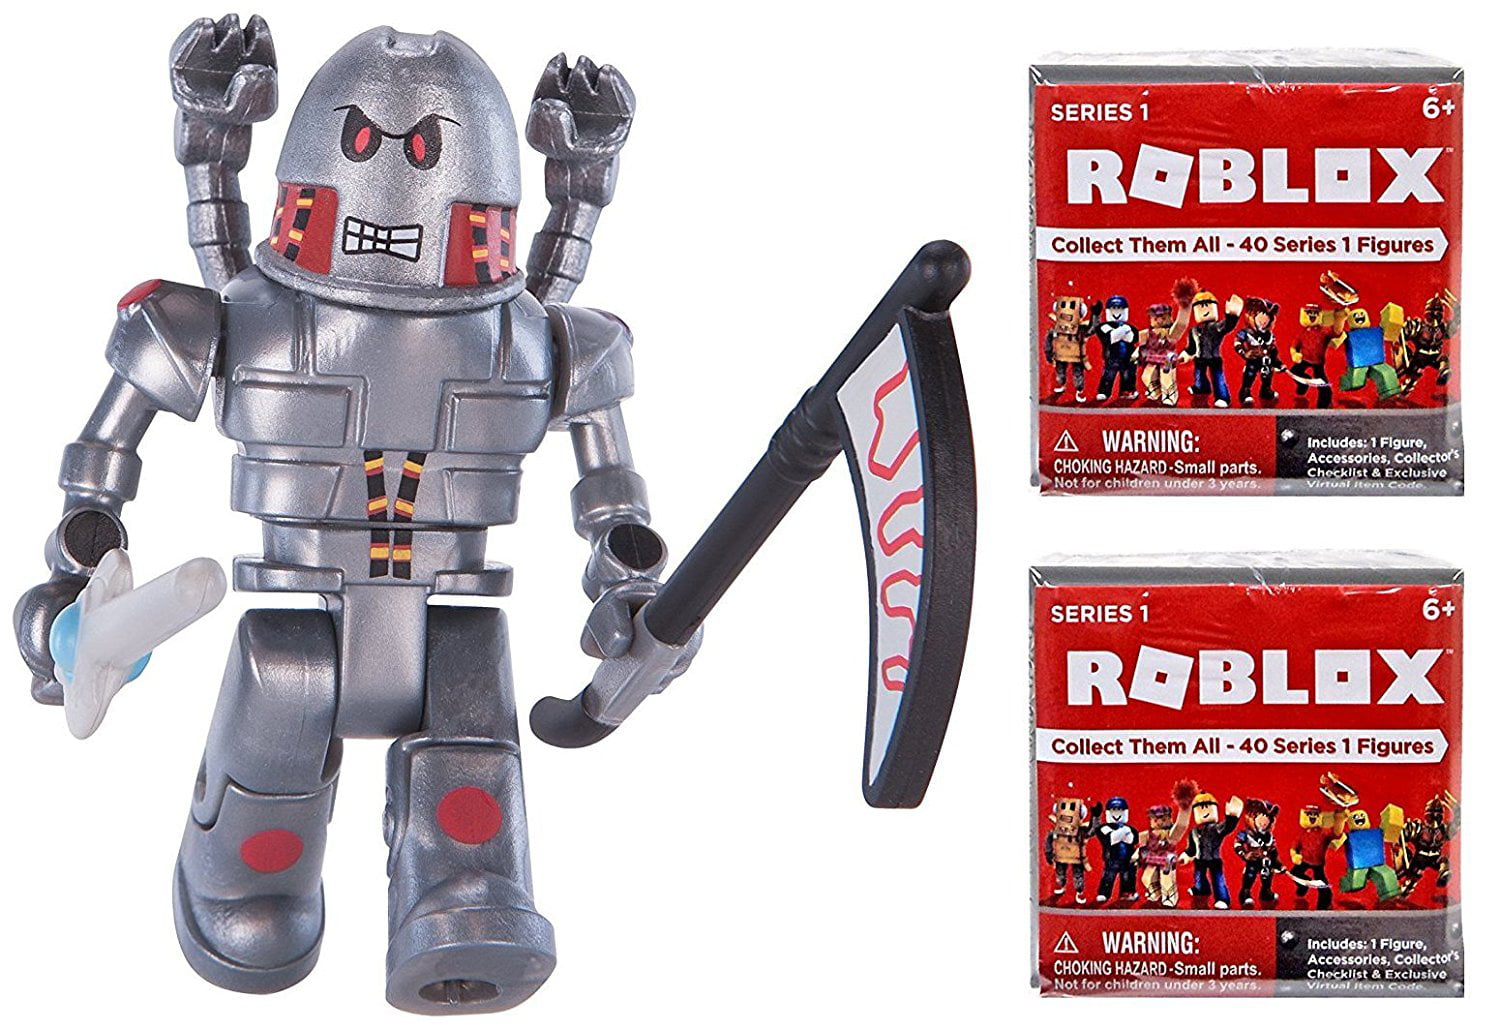 Roblox Action Bundle Includes 1 Circuit Breaker Figure Pack Set Of 2 Series 1 Mystery Box Toys Bundle Includes 1 Circuit Breaker Figure Pack 2 Series By Action Media Gifts Walmart Com Walmart Com - new roblox toy code bundle roblox